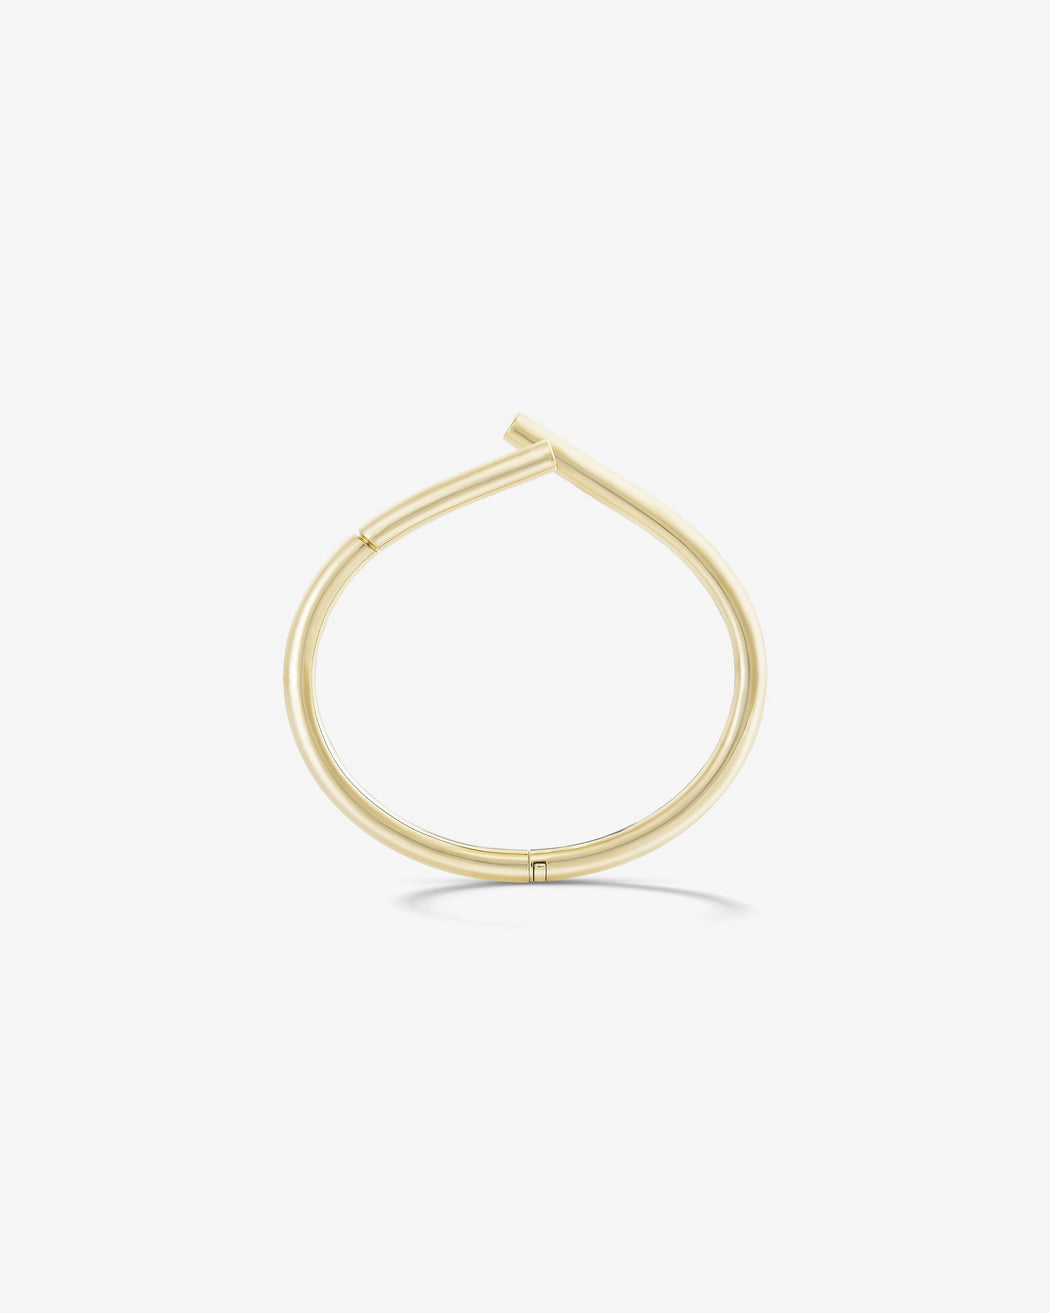 Oera bracelet 18k Fairmined yellow gold and diamond, Tabayer ethical fine jewelry